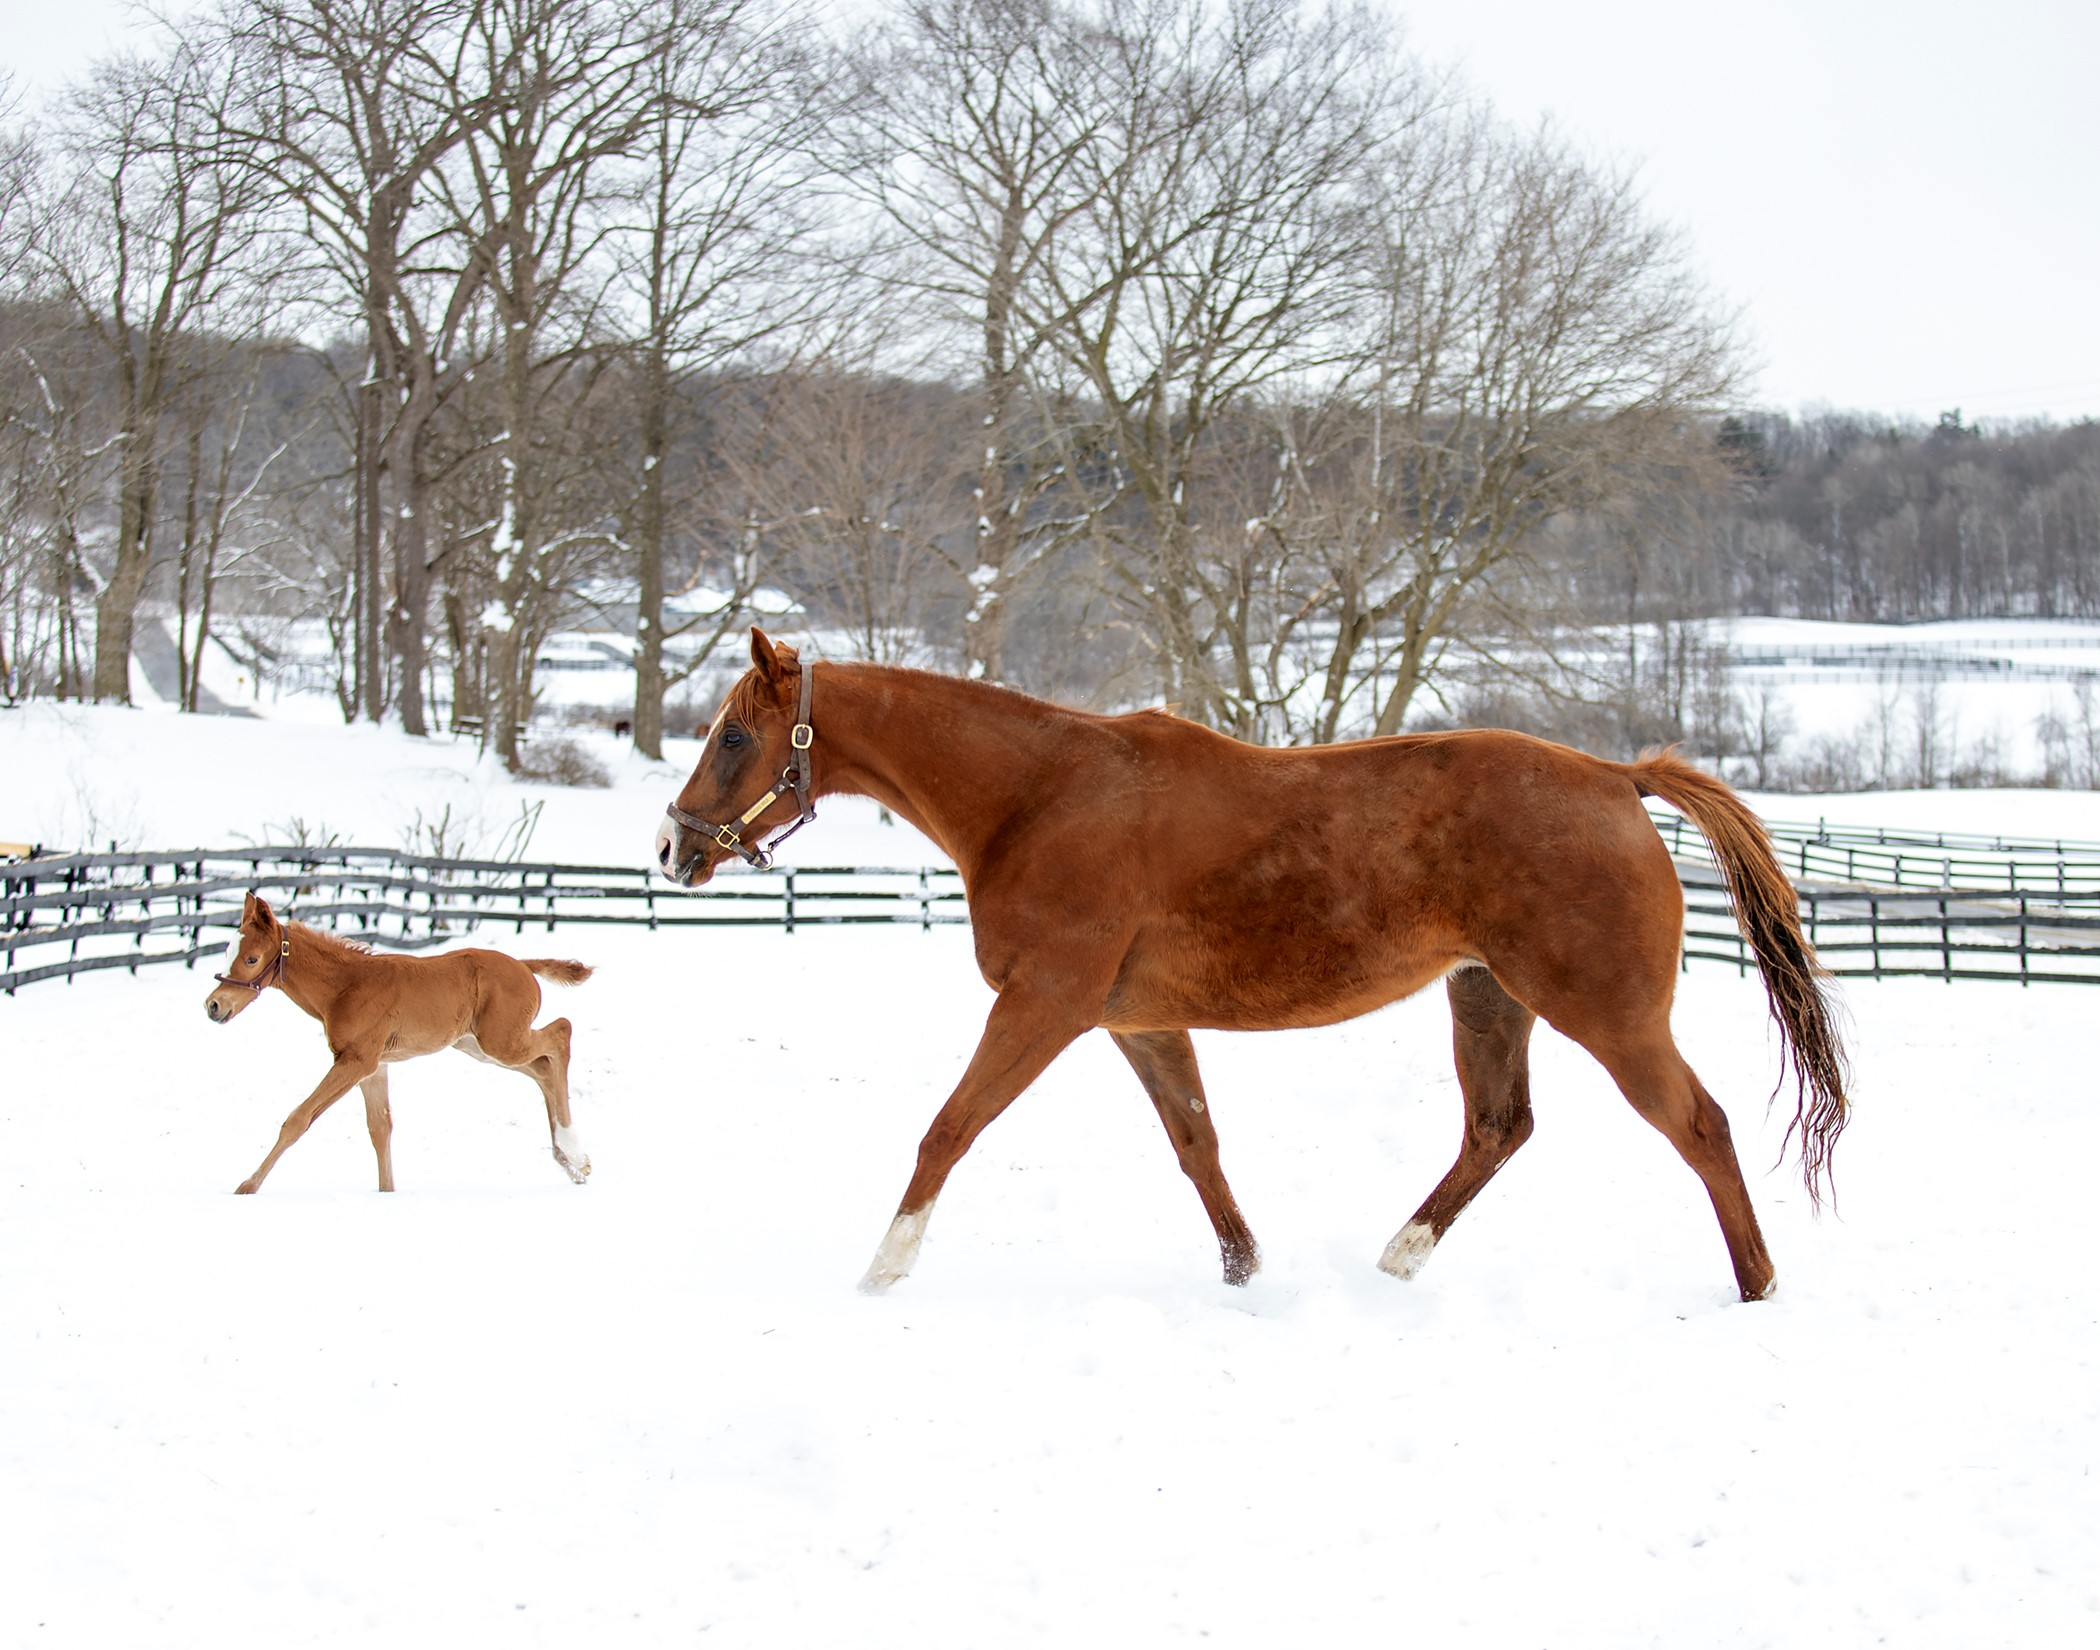 "Fresh Frolic" (Saratoga Springs, NY - March 12, 2022), photograph by Stacey Hetherington